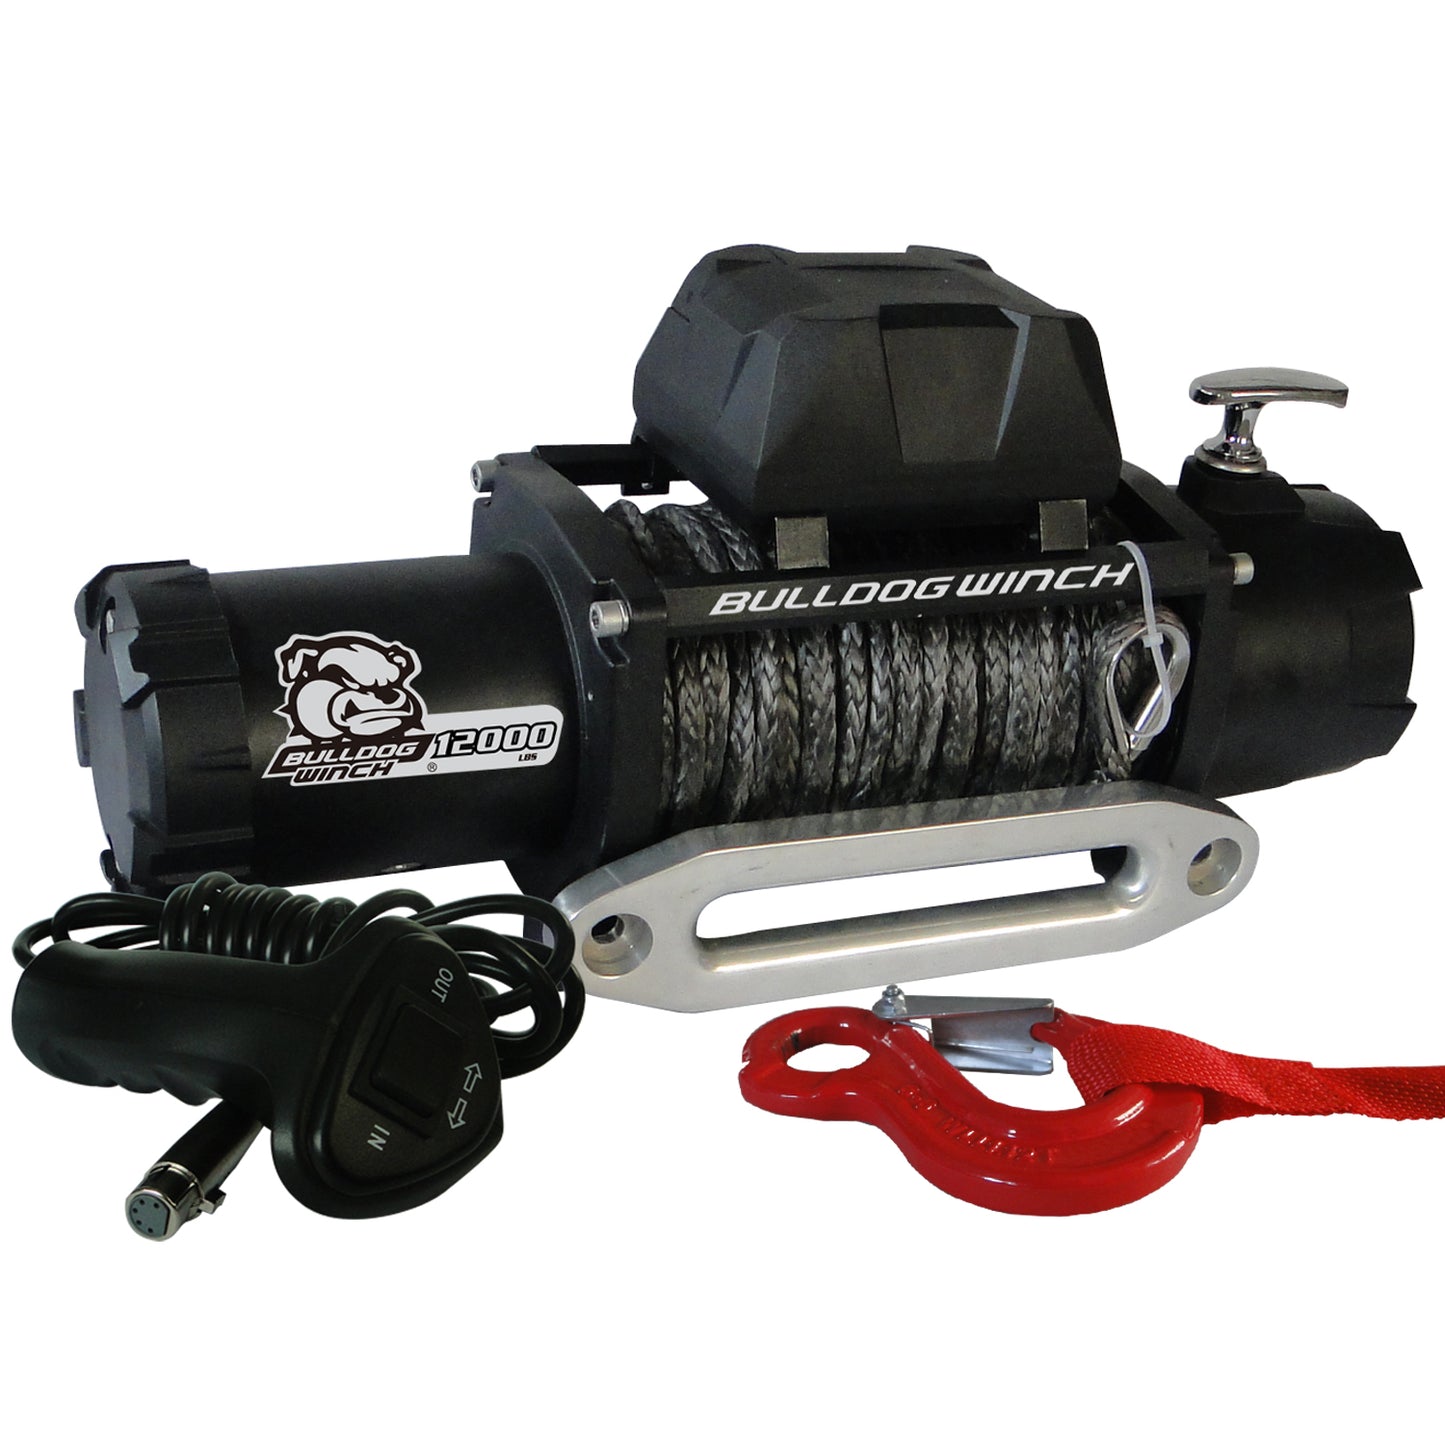 Bulldog Winch 12,00 LB Winch 100 Ft Synthetic Rope 6.0hp Series Wound Motor Roller Fairlead